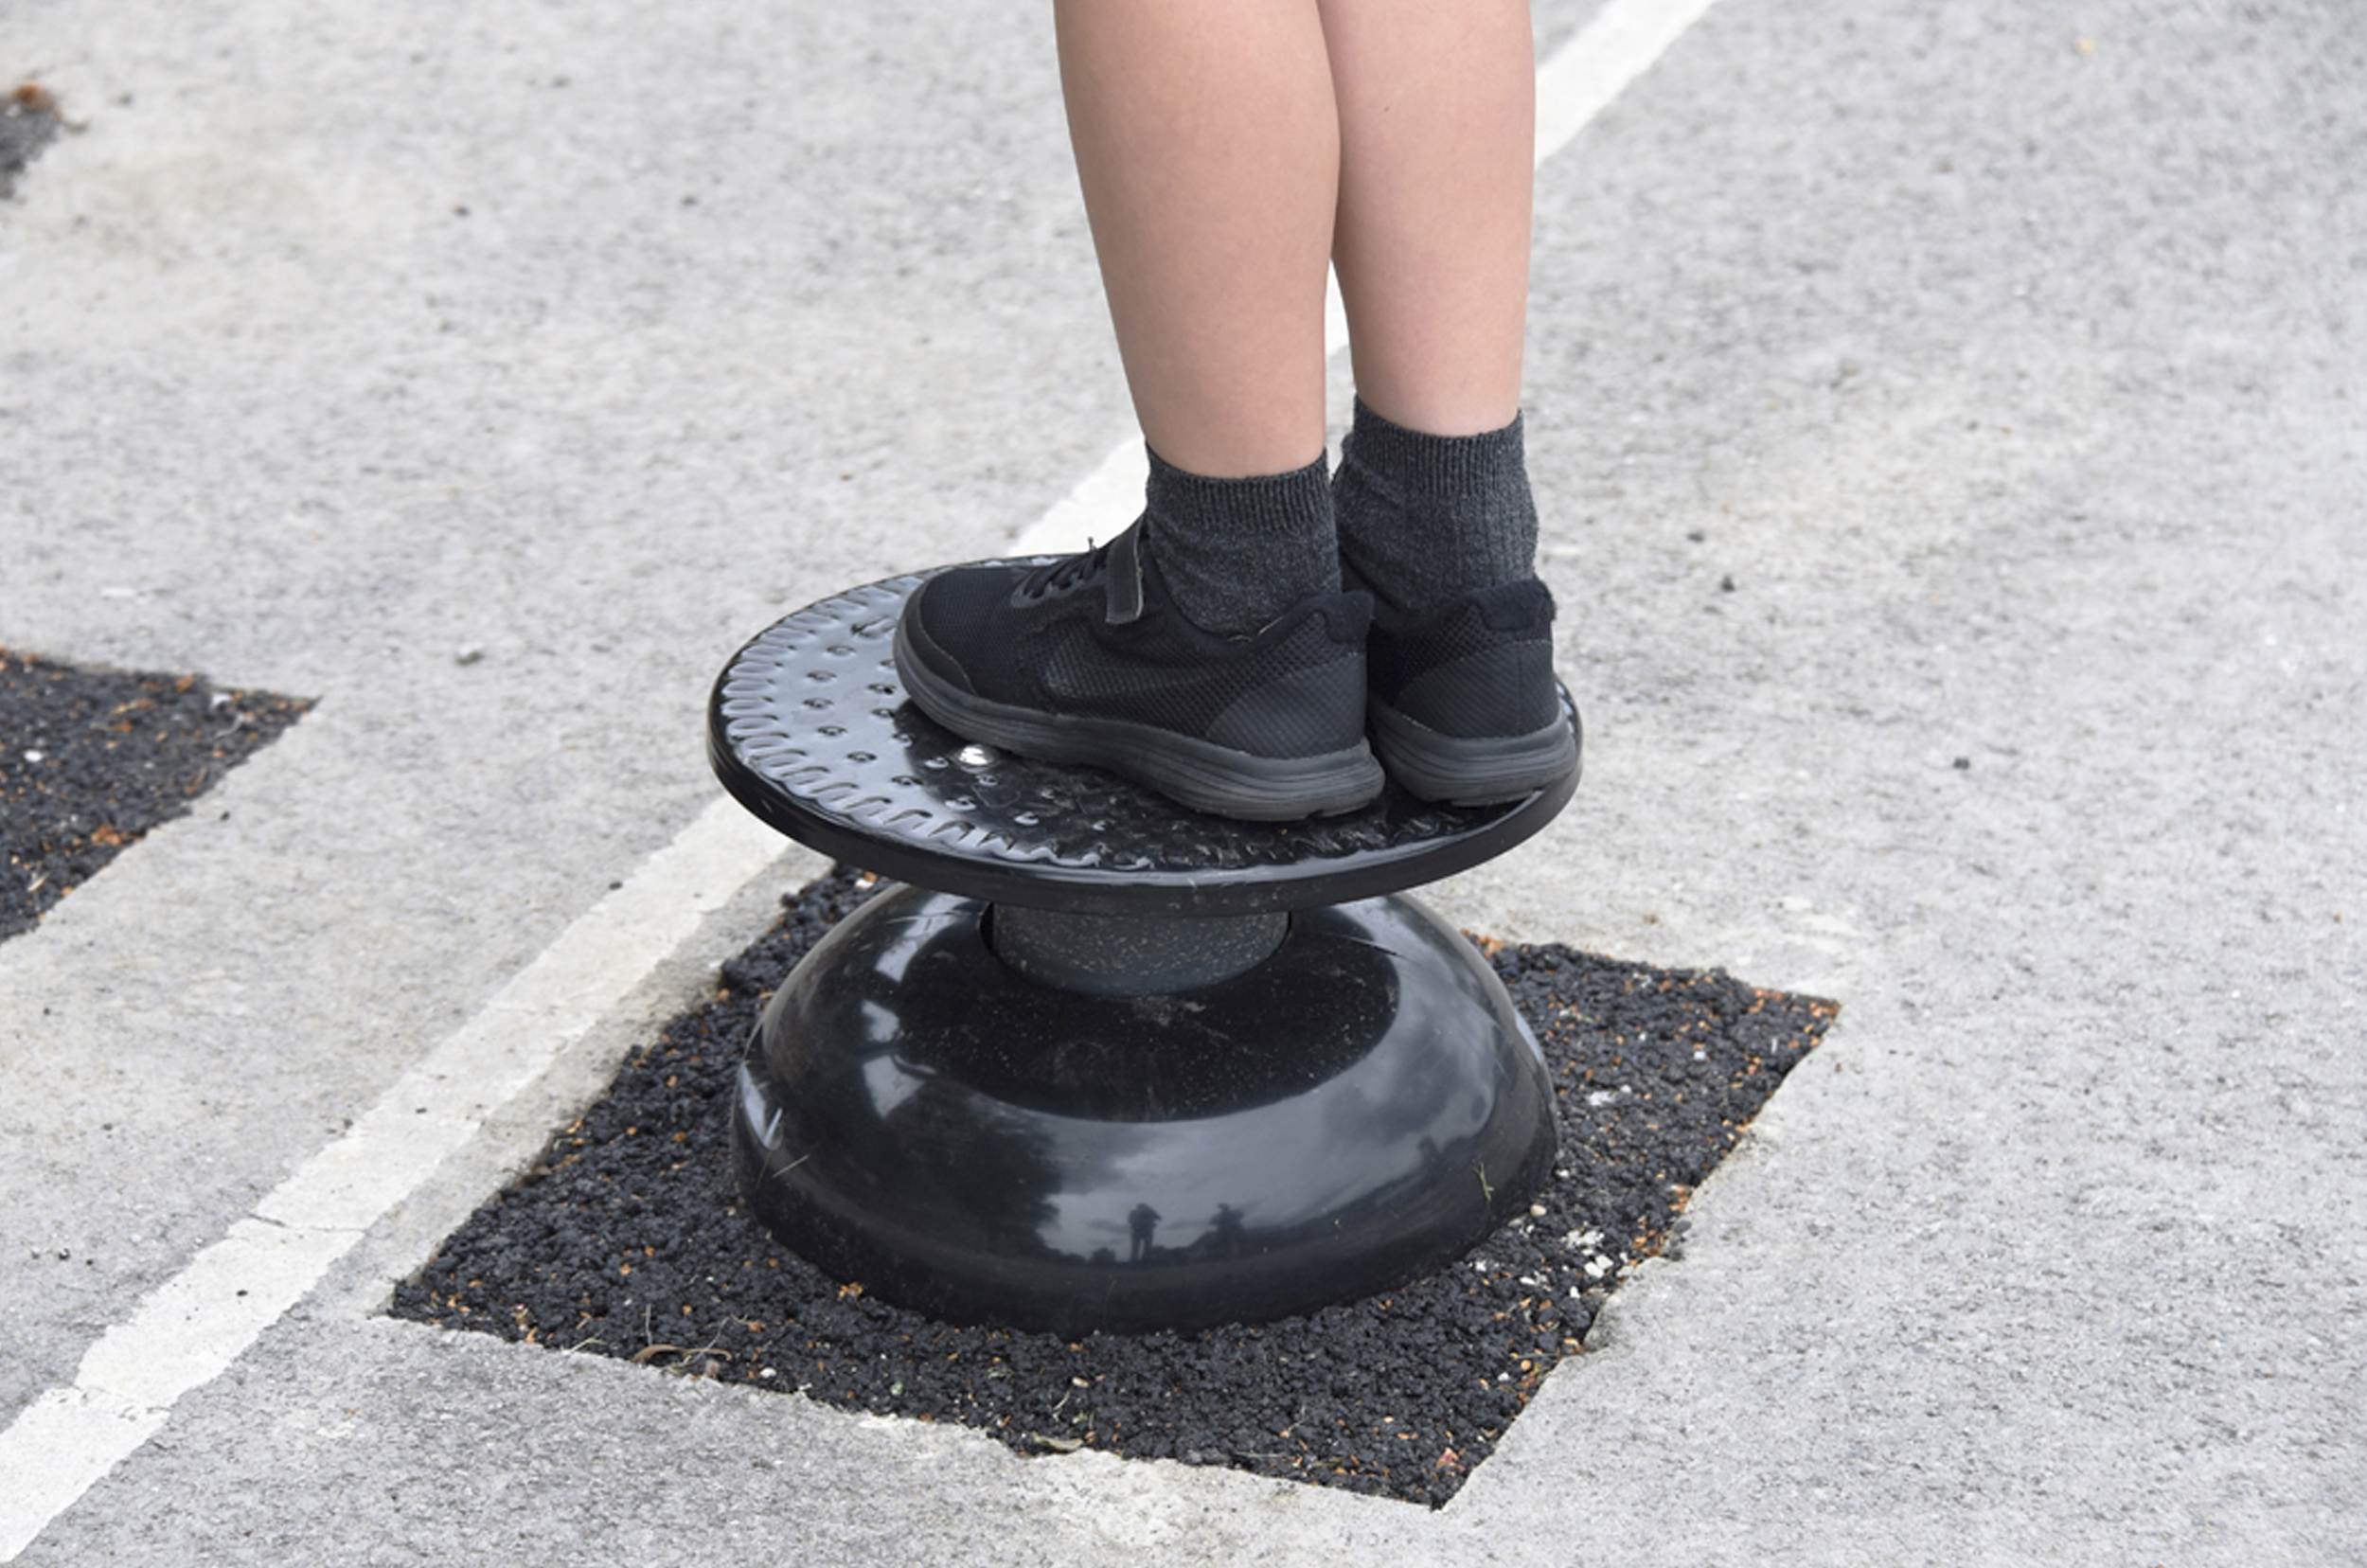 A Childs feet stand upon a black circular disc sat on tarmac